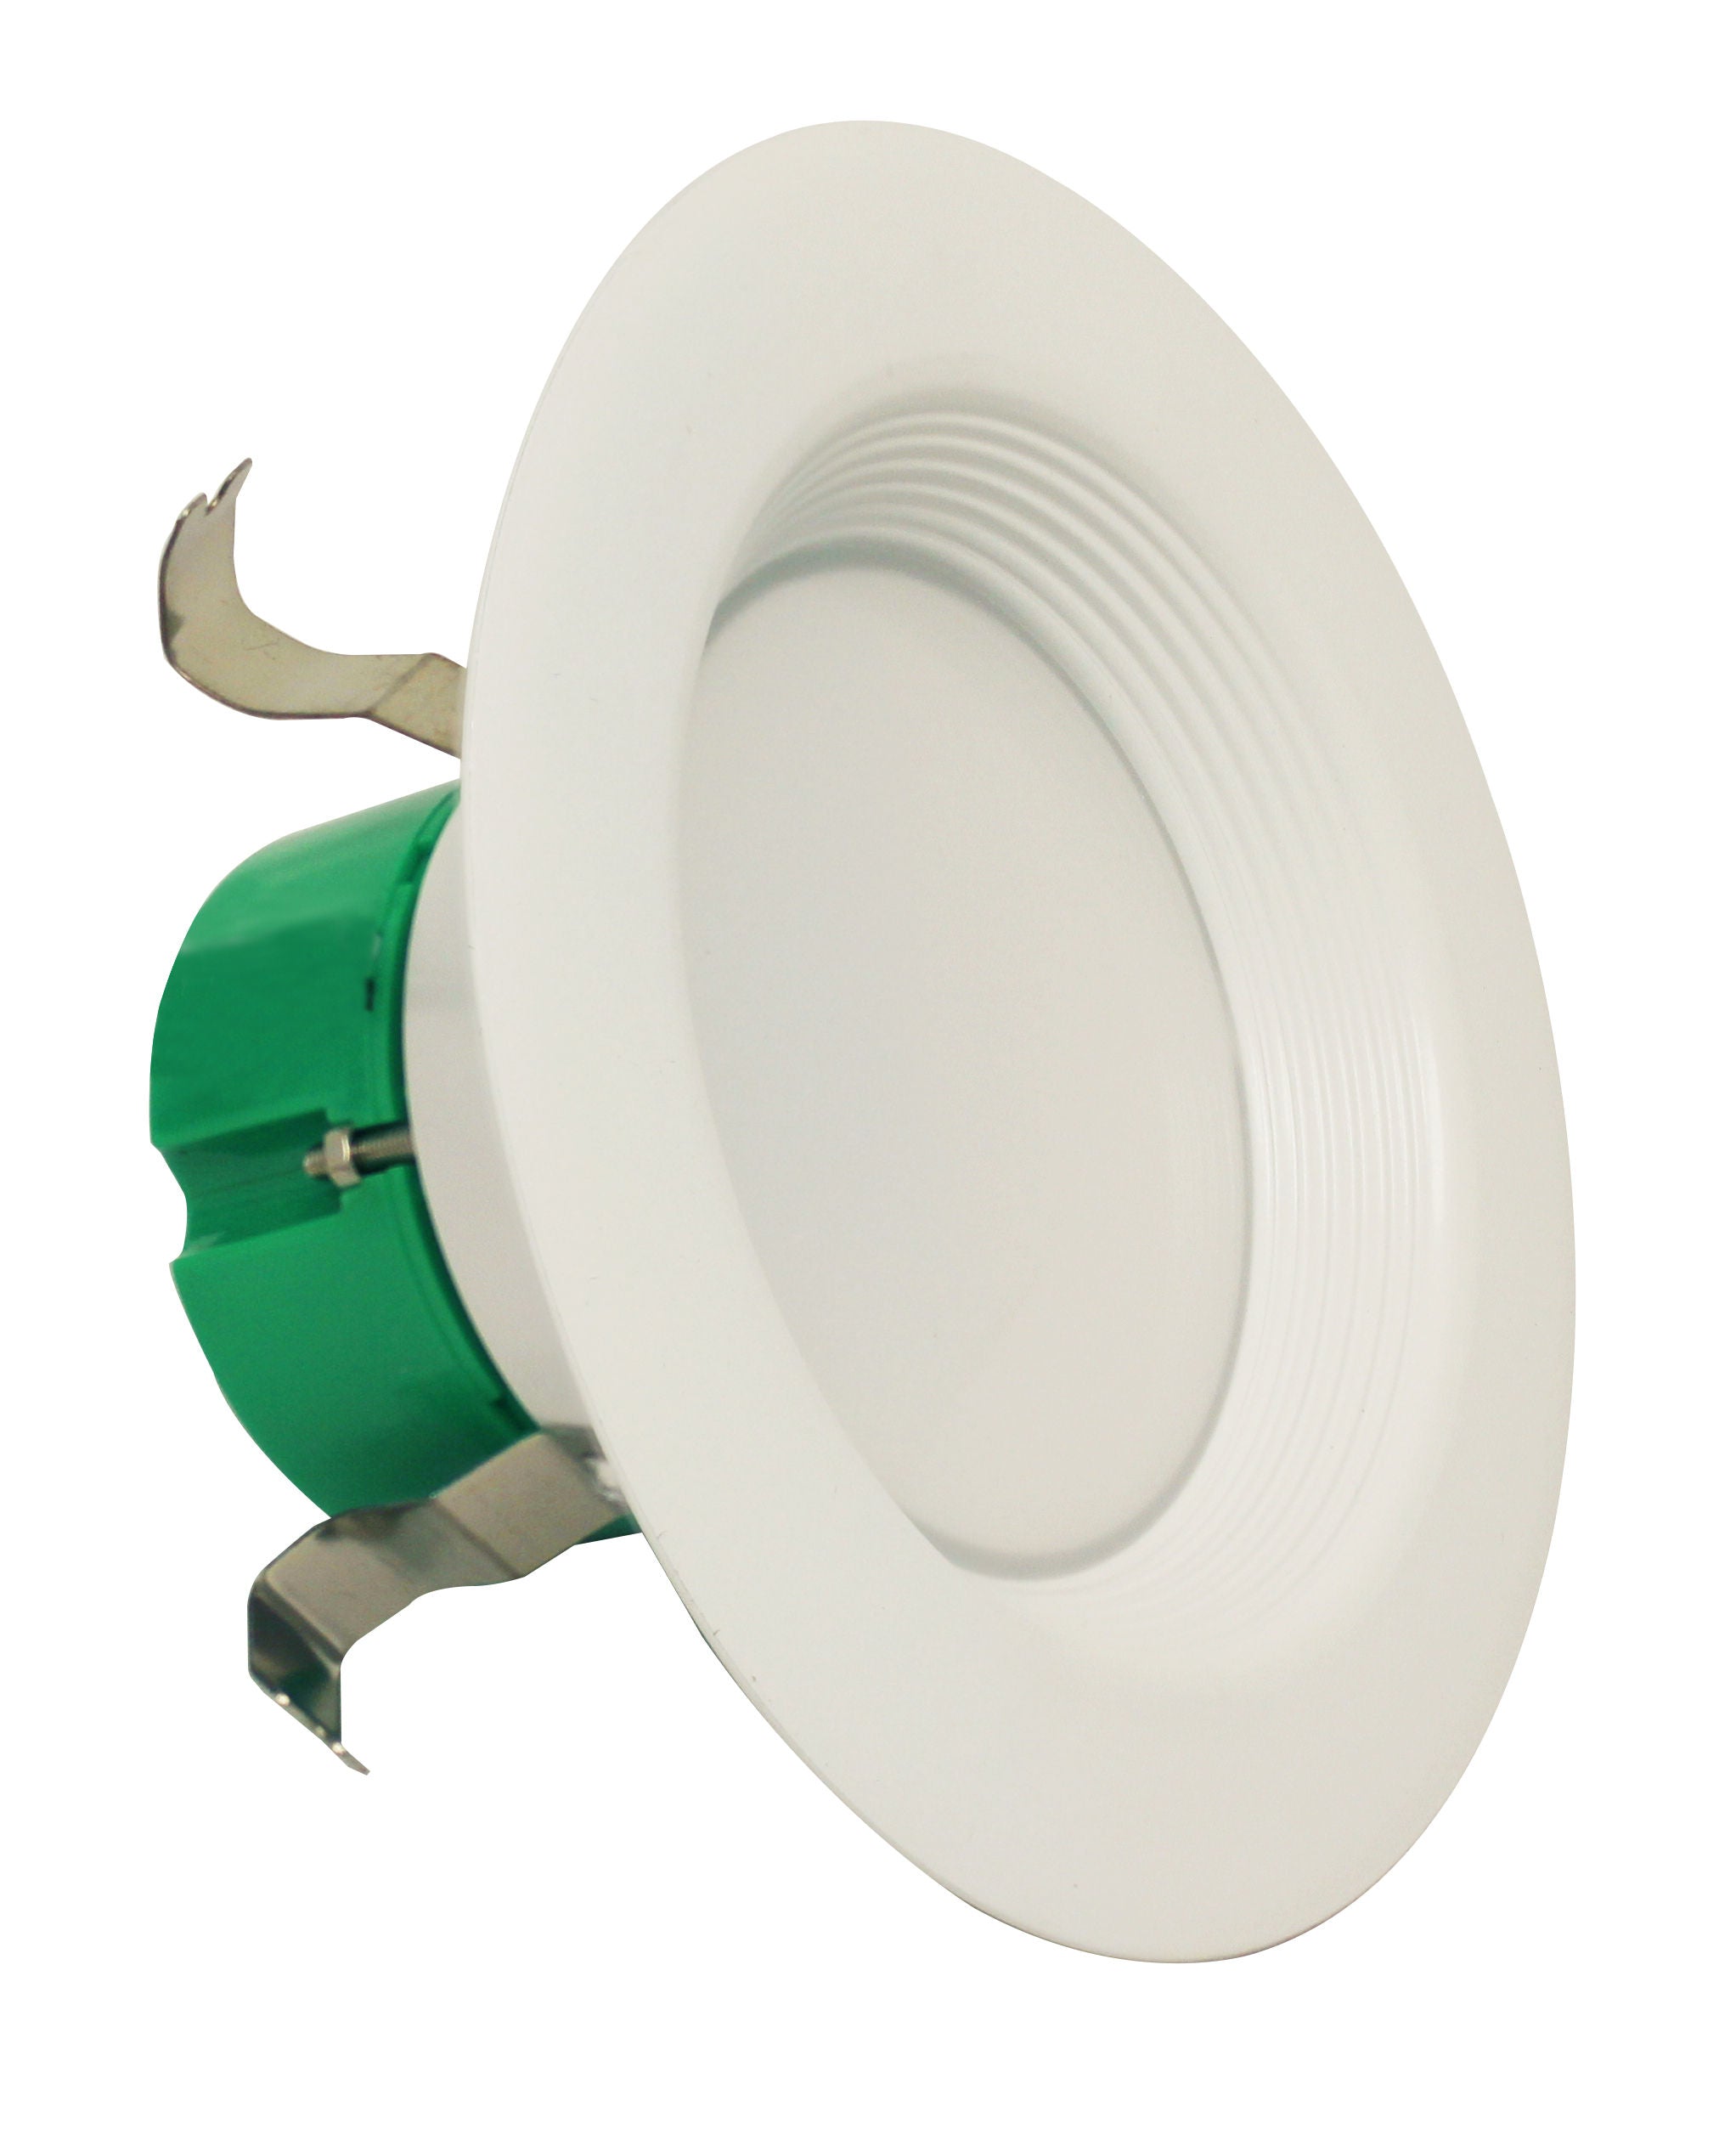 Westgate RDL4-BF-30K 4" LED Recessed Downlight with Baffle Trim Residential Lighting - White